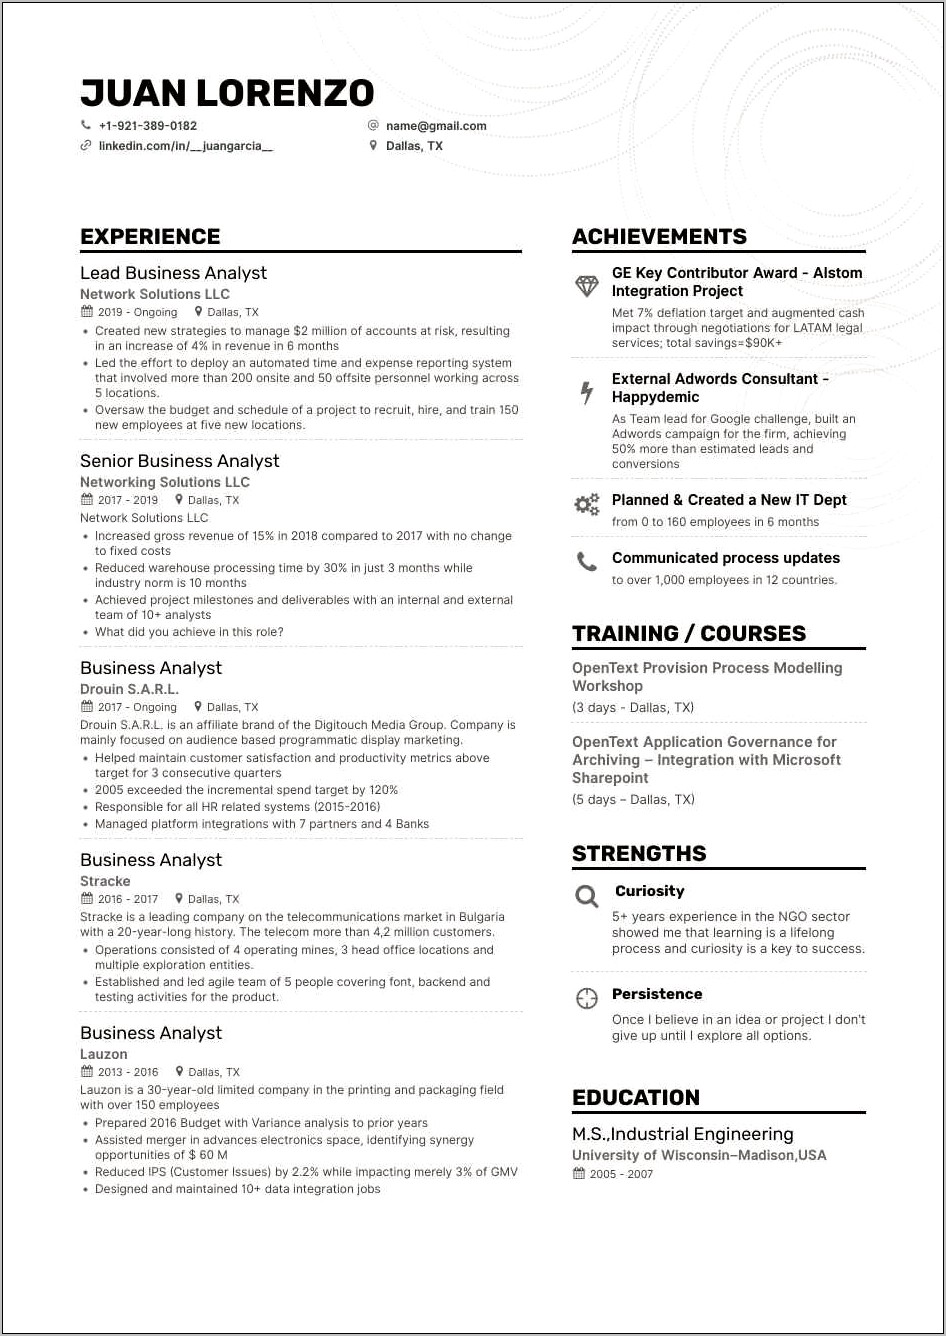 Objective Statments For Business Analyst Resume